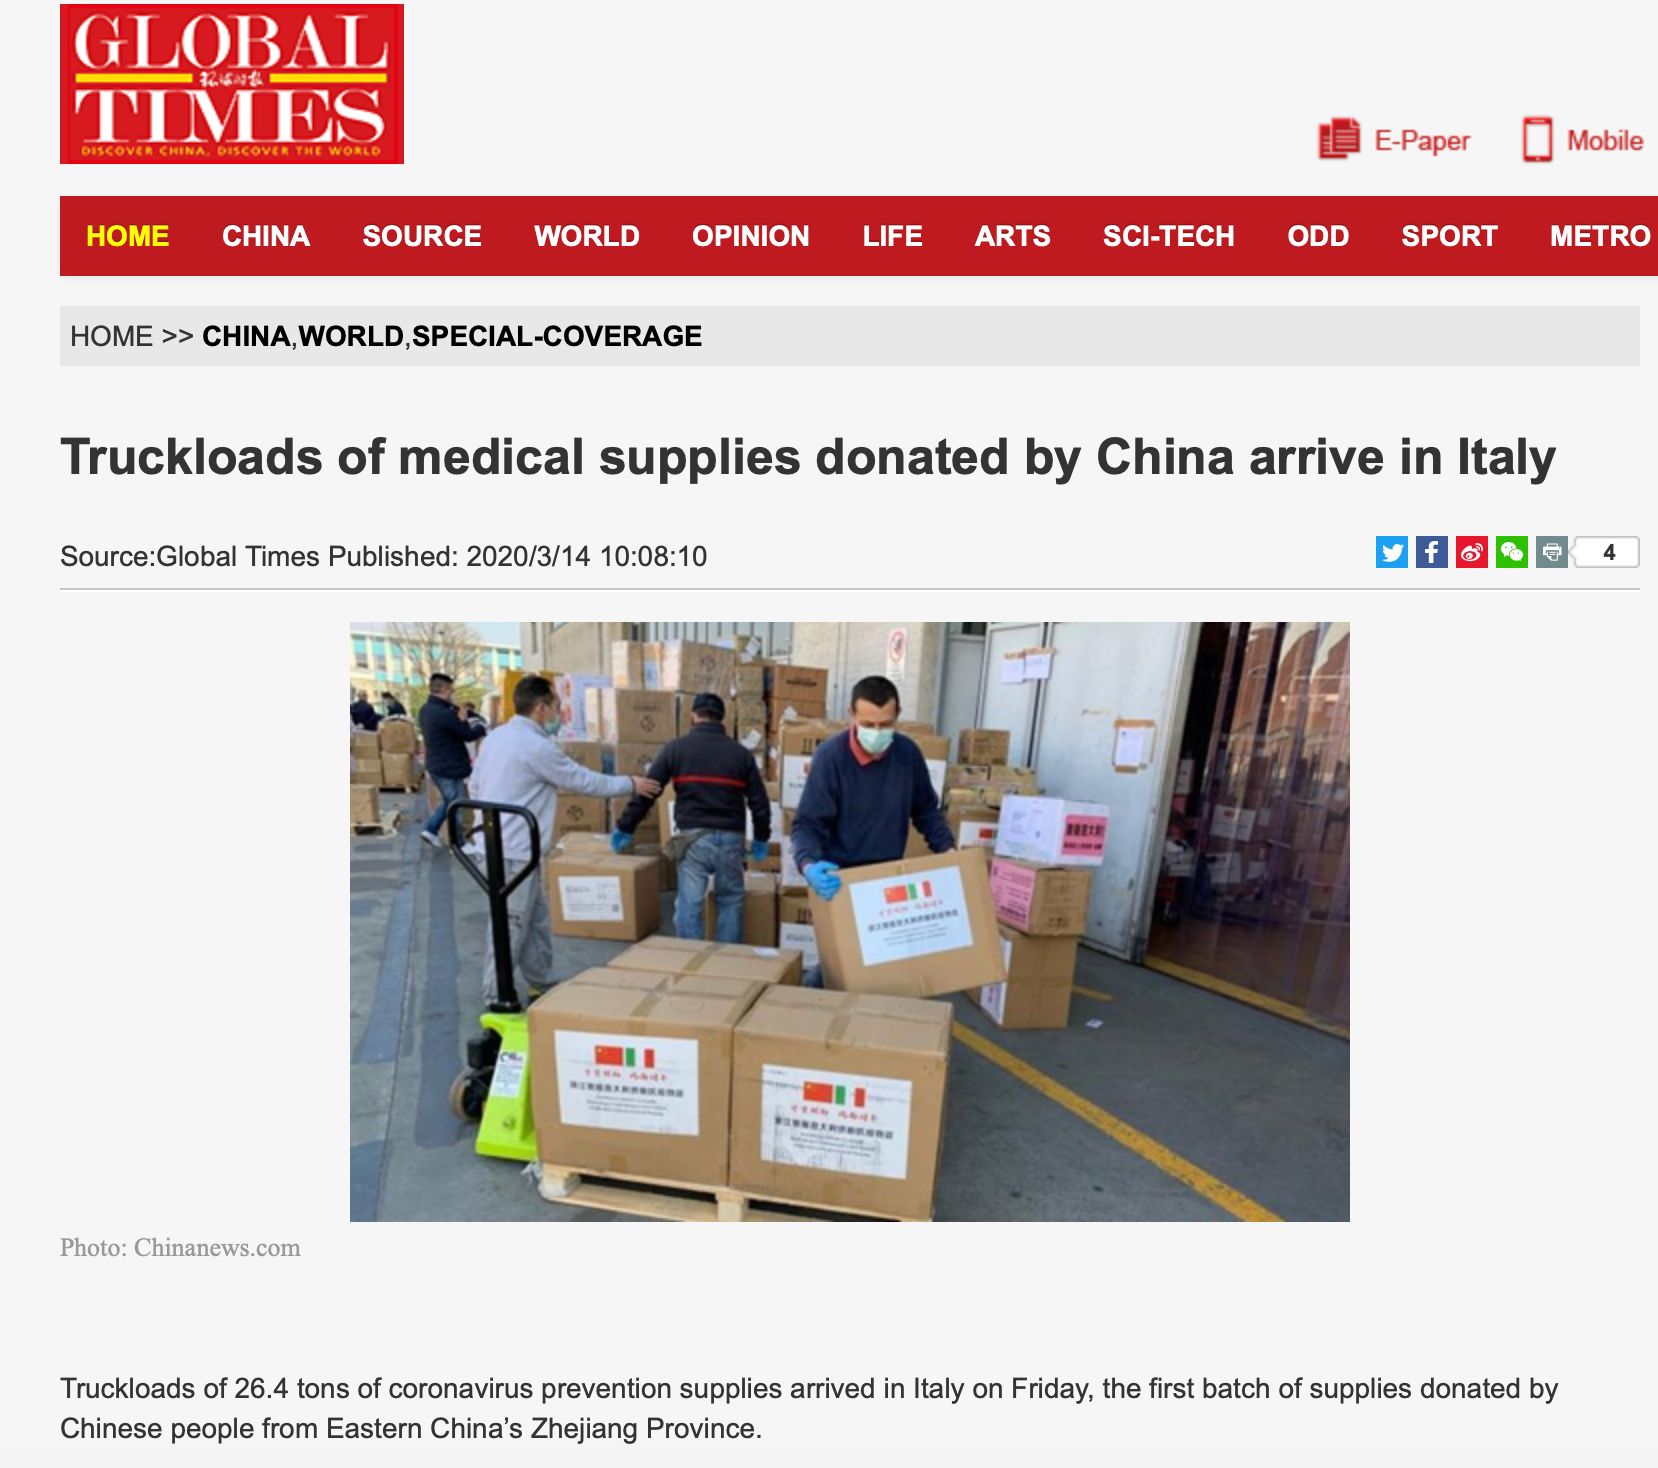 Chinese medical aid shipment arrived in Italy, according to media reports.